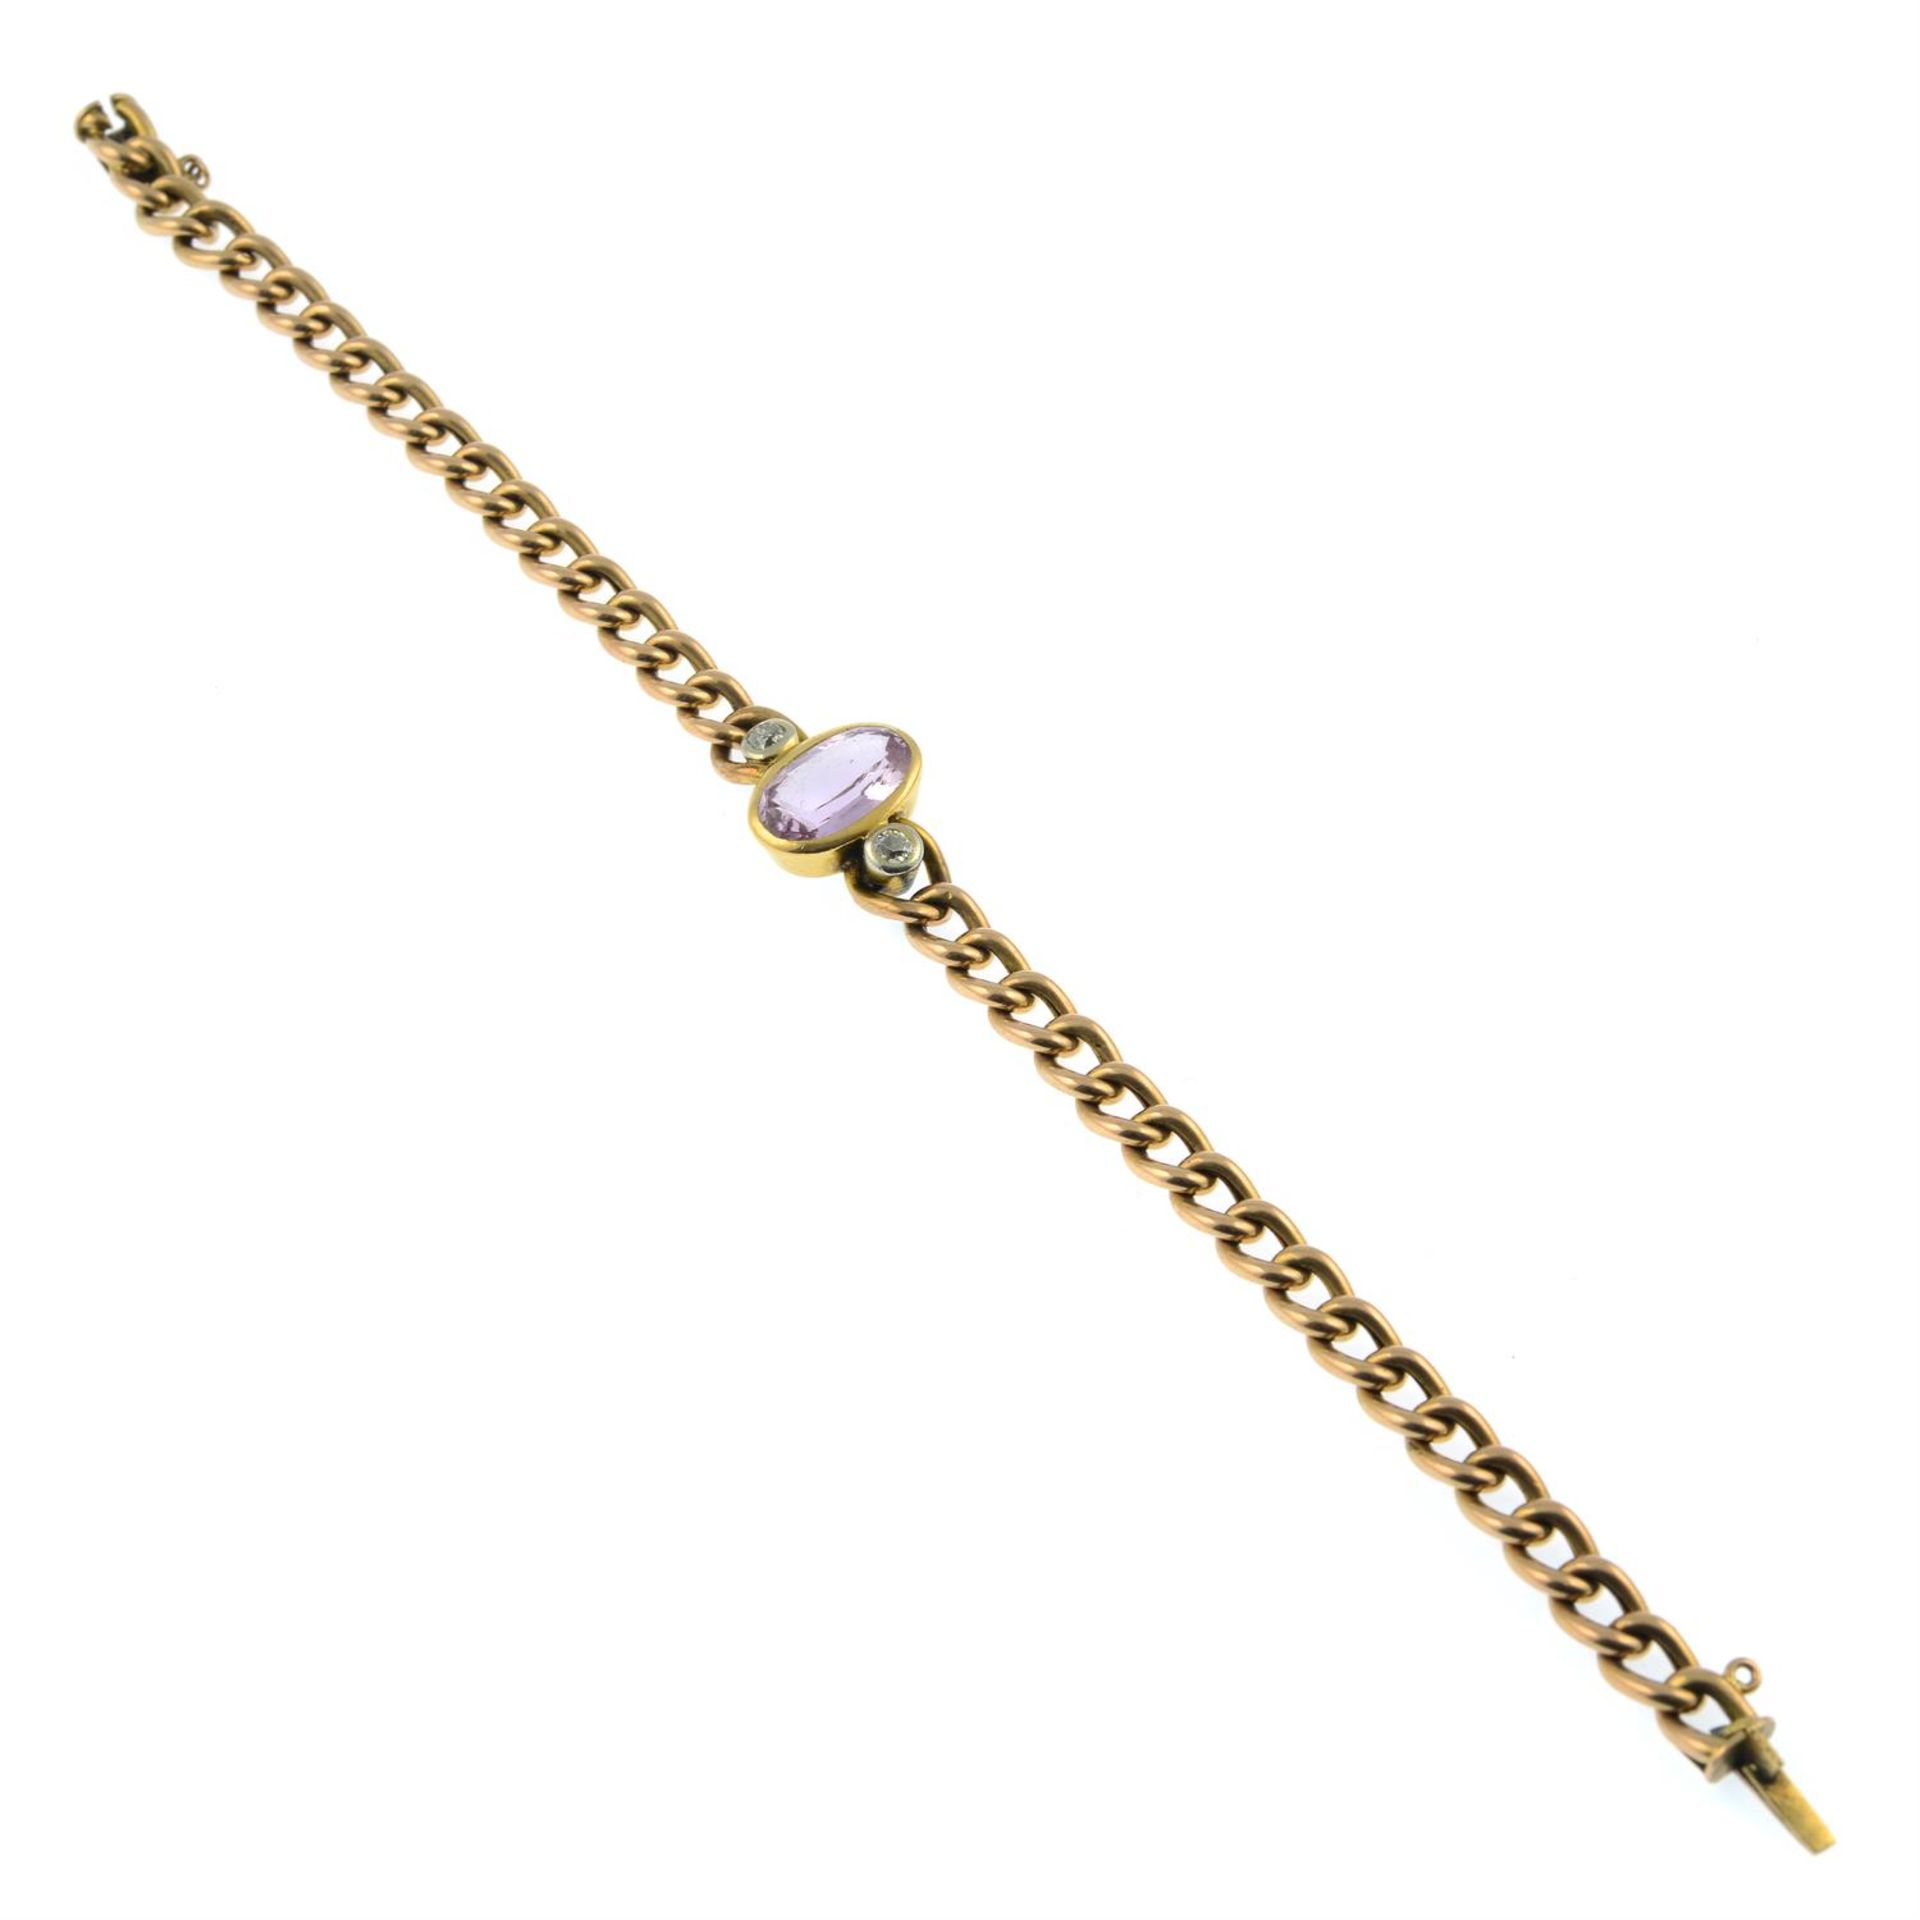 An early 20th century gold curb-link bracelet, with pink topaz and old-cut diamond sides inset. - Image 3 of 4